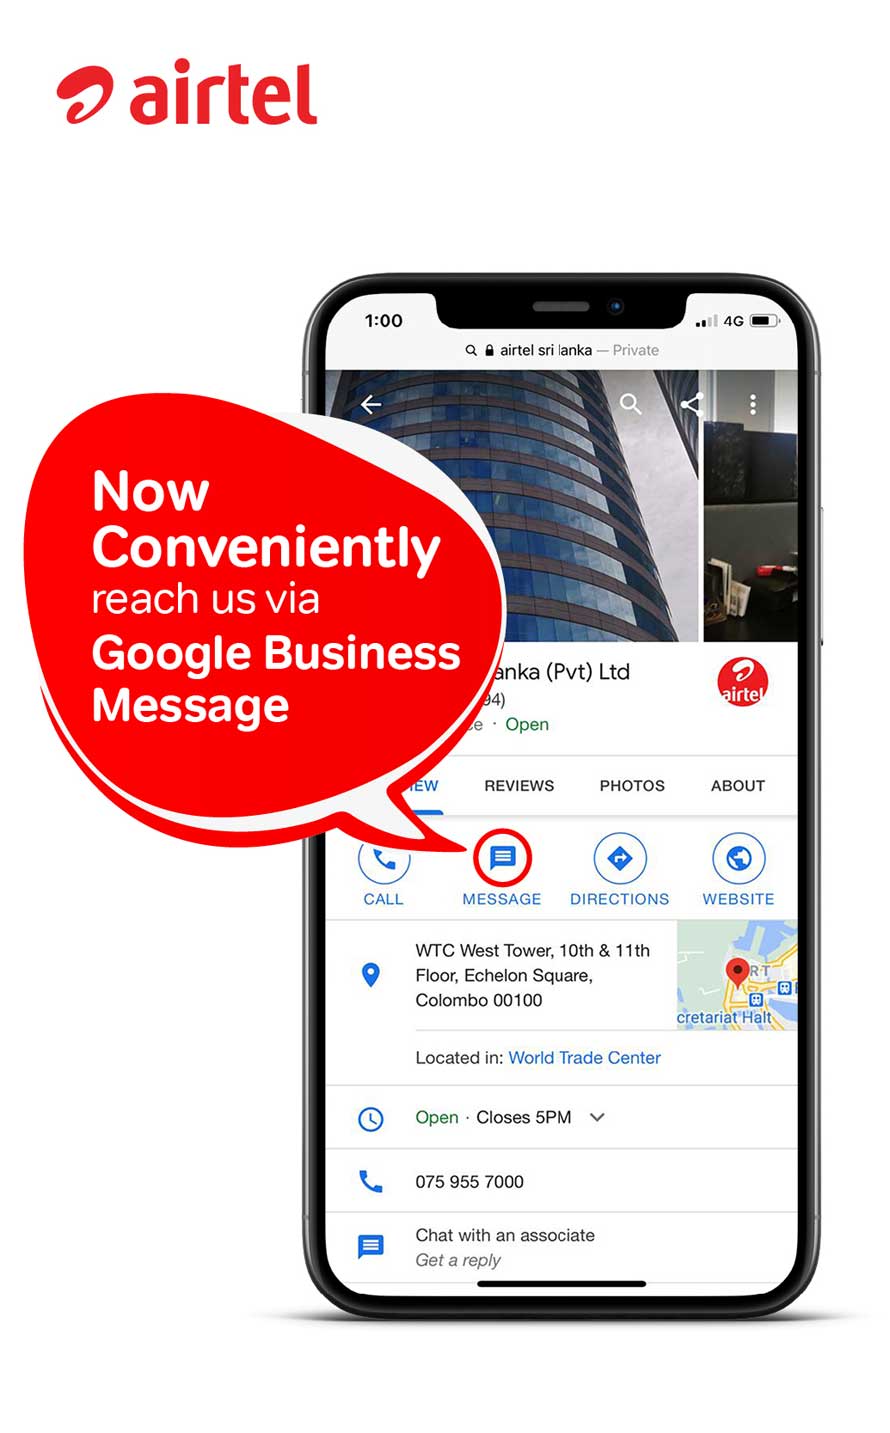 Airtel becomes first Sri Lankan telco to integrate Google Business Messages